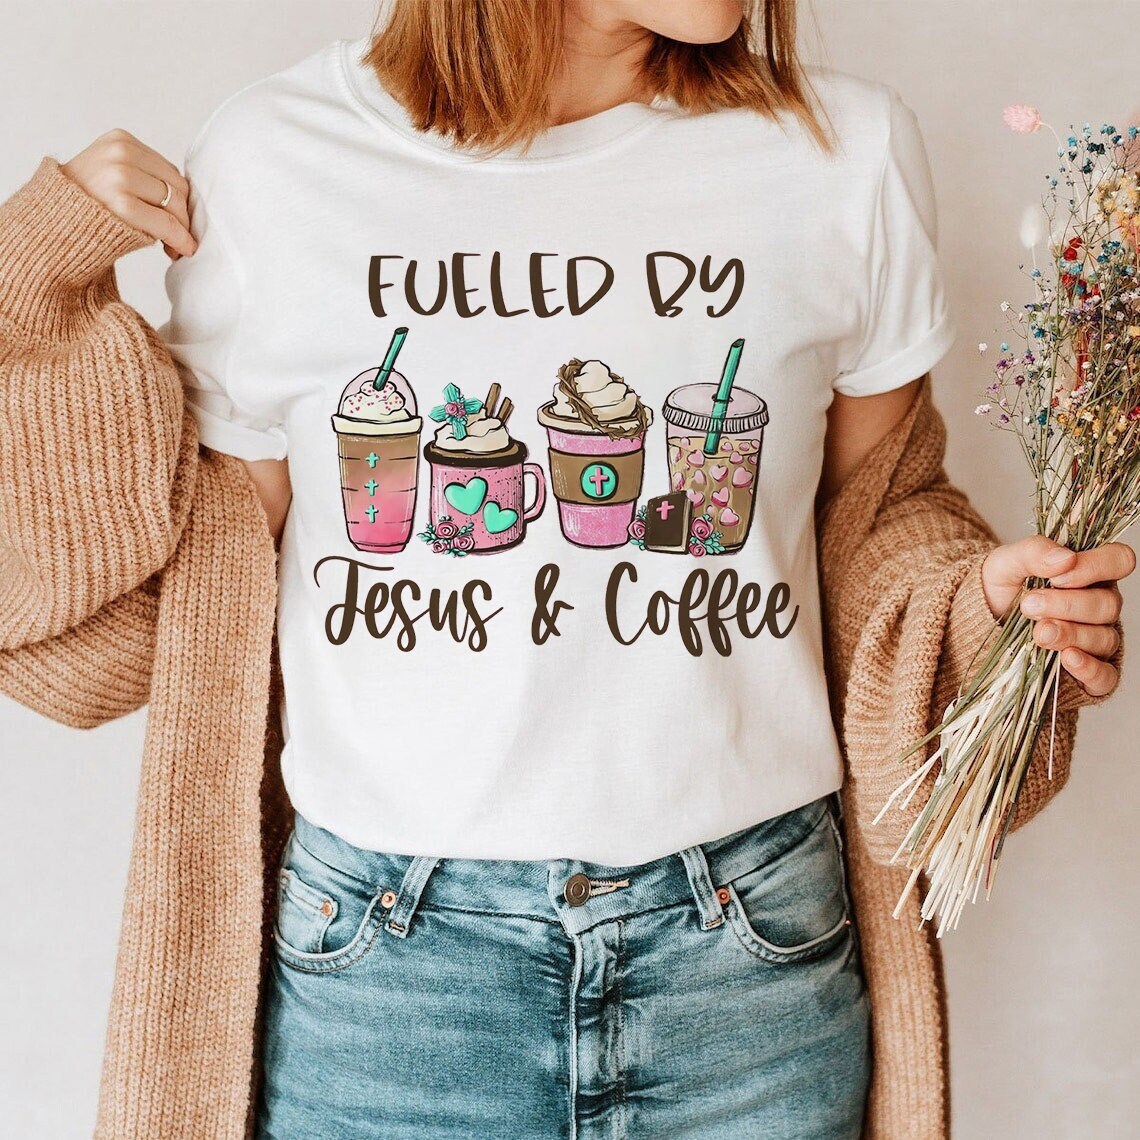 Skitongift Fuelled By Jesus and Coffee Funny Shirt, gifts for Dad Mom,Gifts for Him, Her, Gifts for Dad Mom